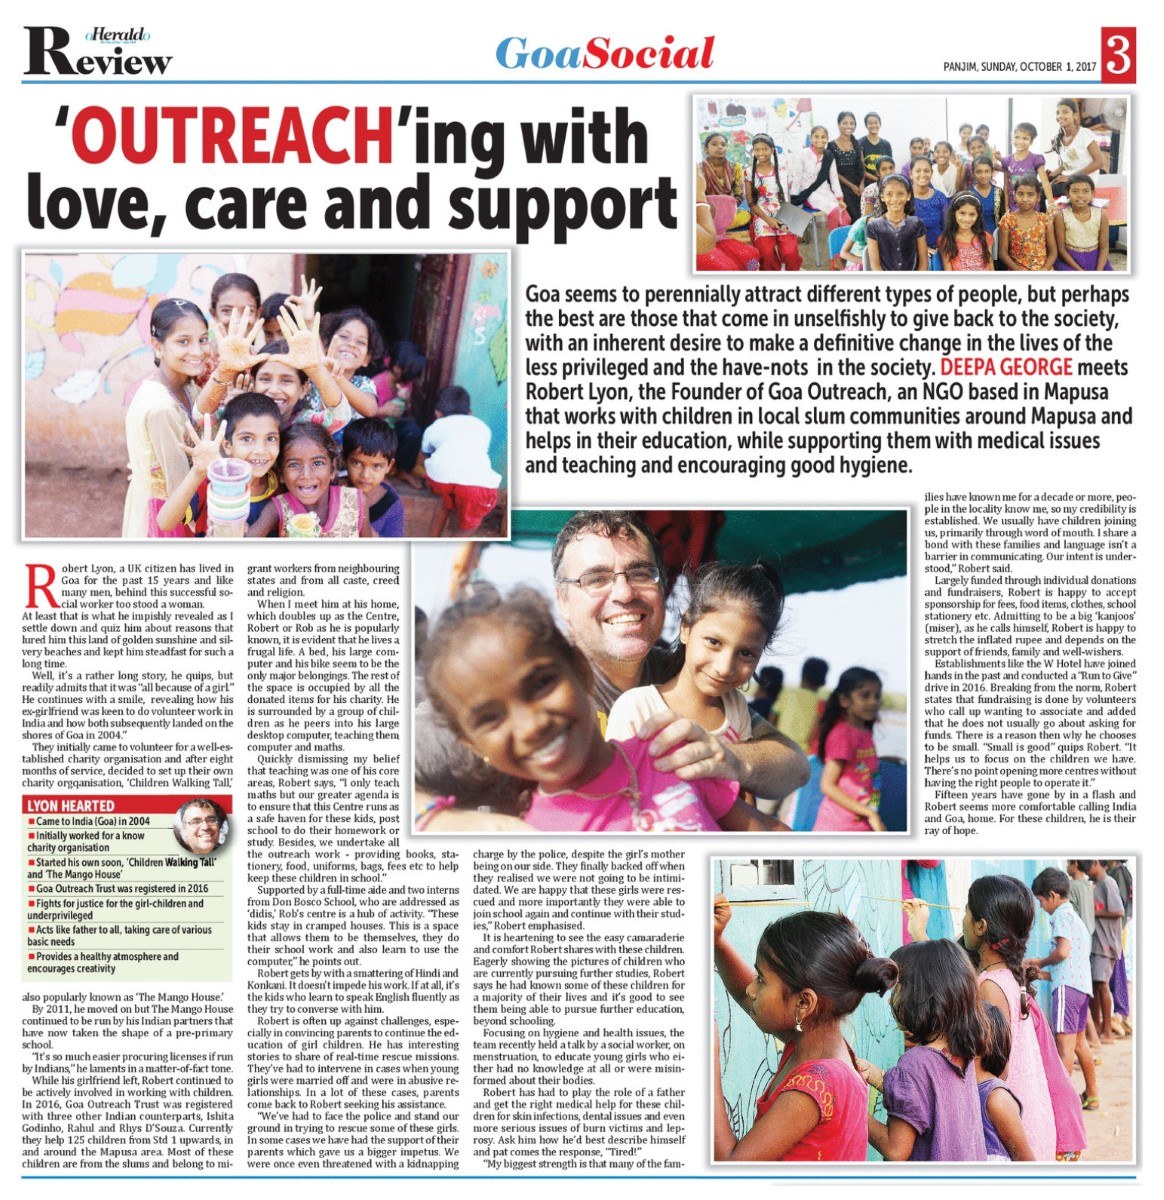 DEEPA GEORGE meets Robert Lyon, the Founder of Goa Outreach, an NGO based in Mapusa that works with children in local slum communities around Mapusa